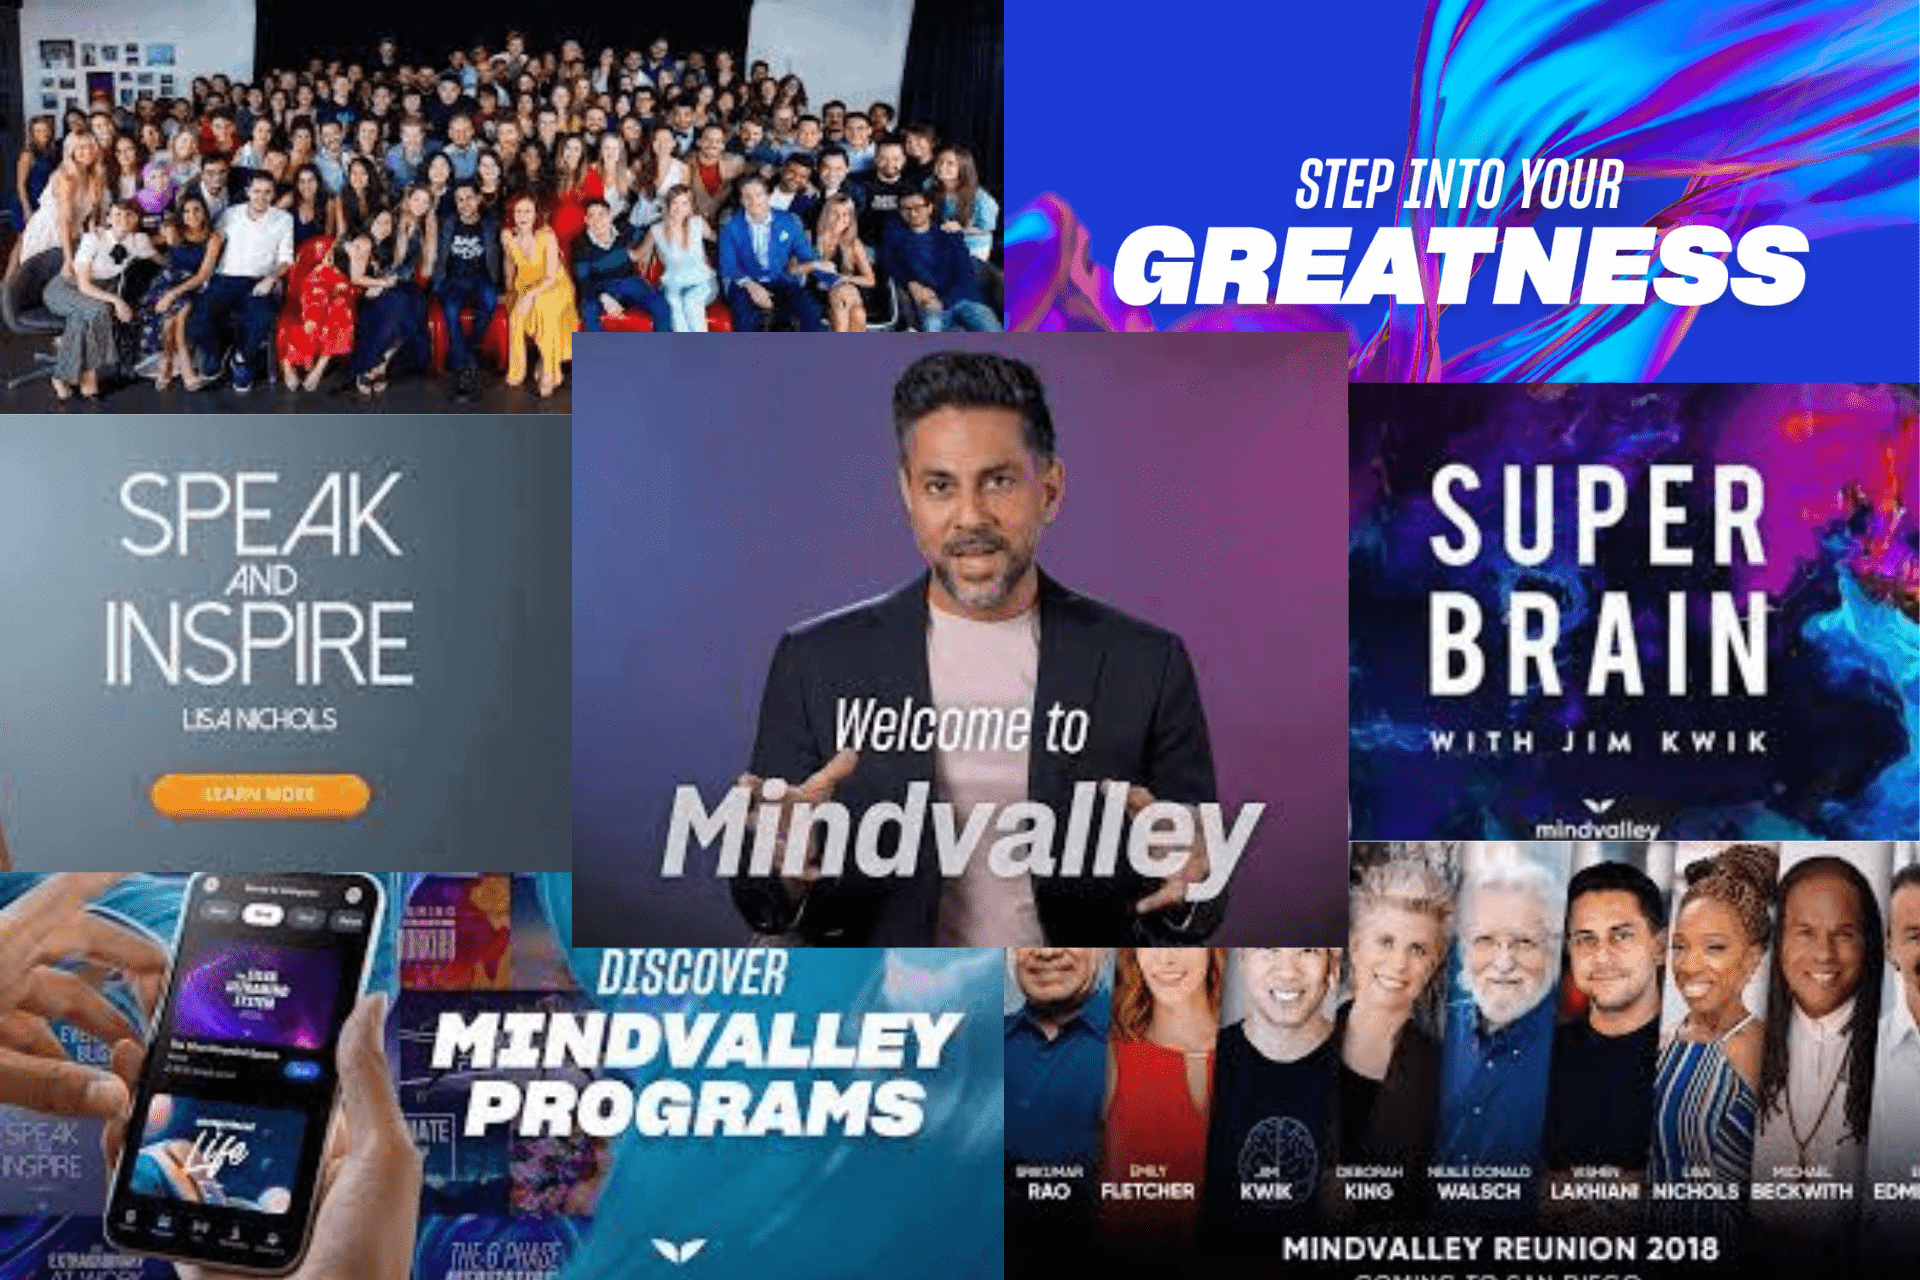 Mindvalley Review